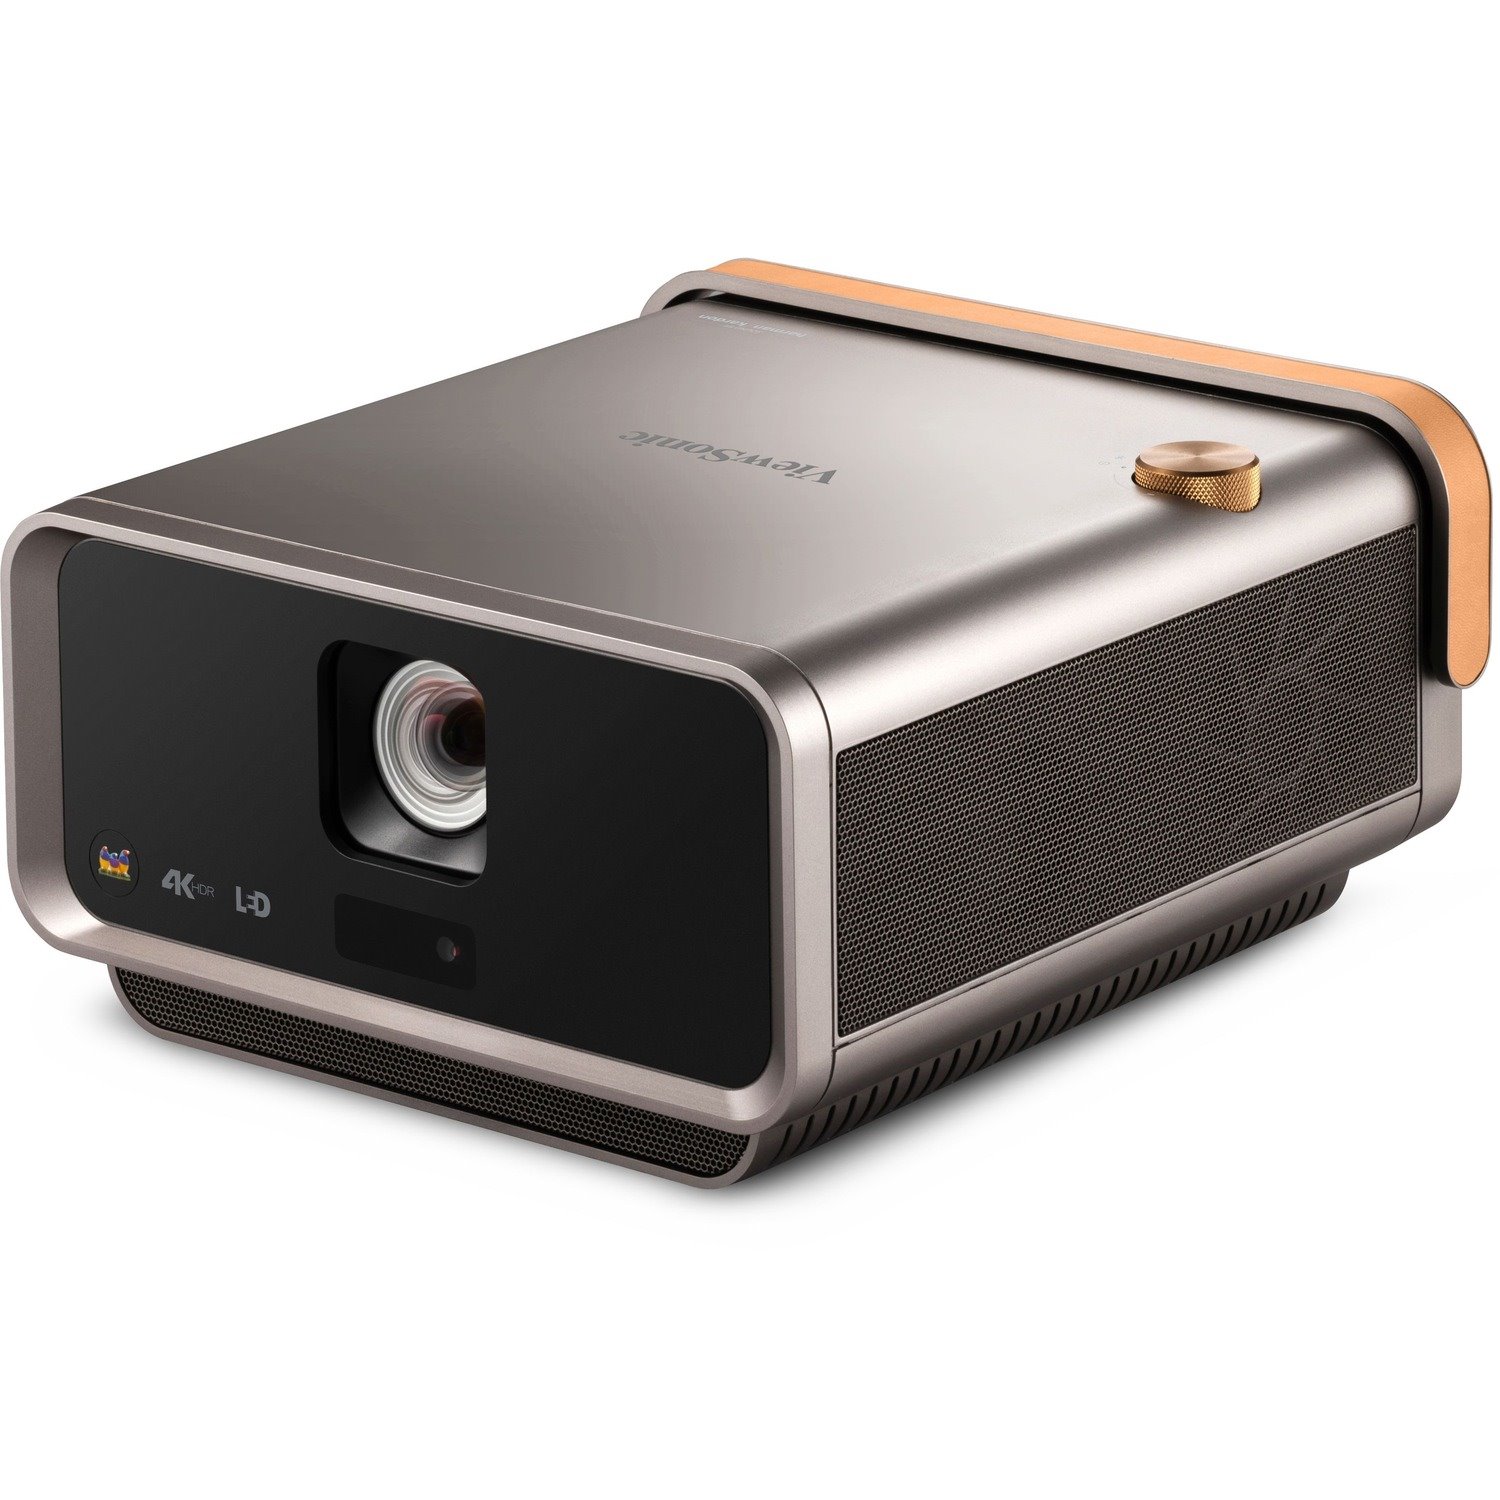 ViewSonic X11-4K 4K UHD Projector with 2400 LED Lumens, USB C, Bluetooth Speakers and Wi-Fi